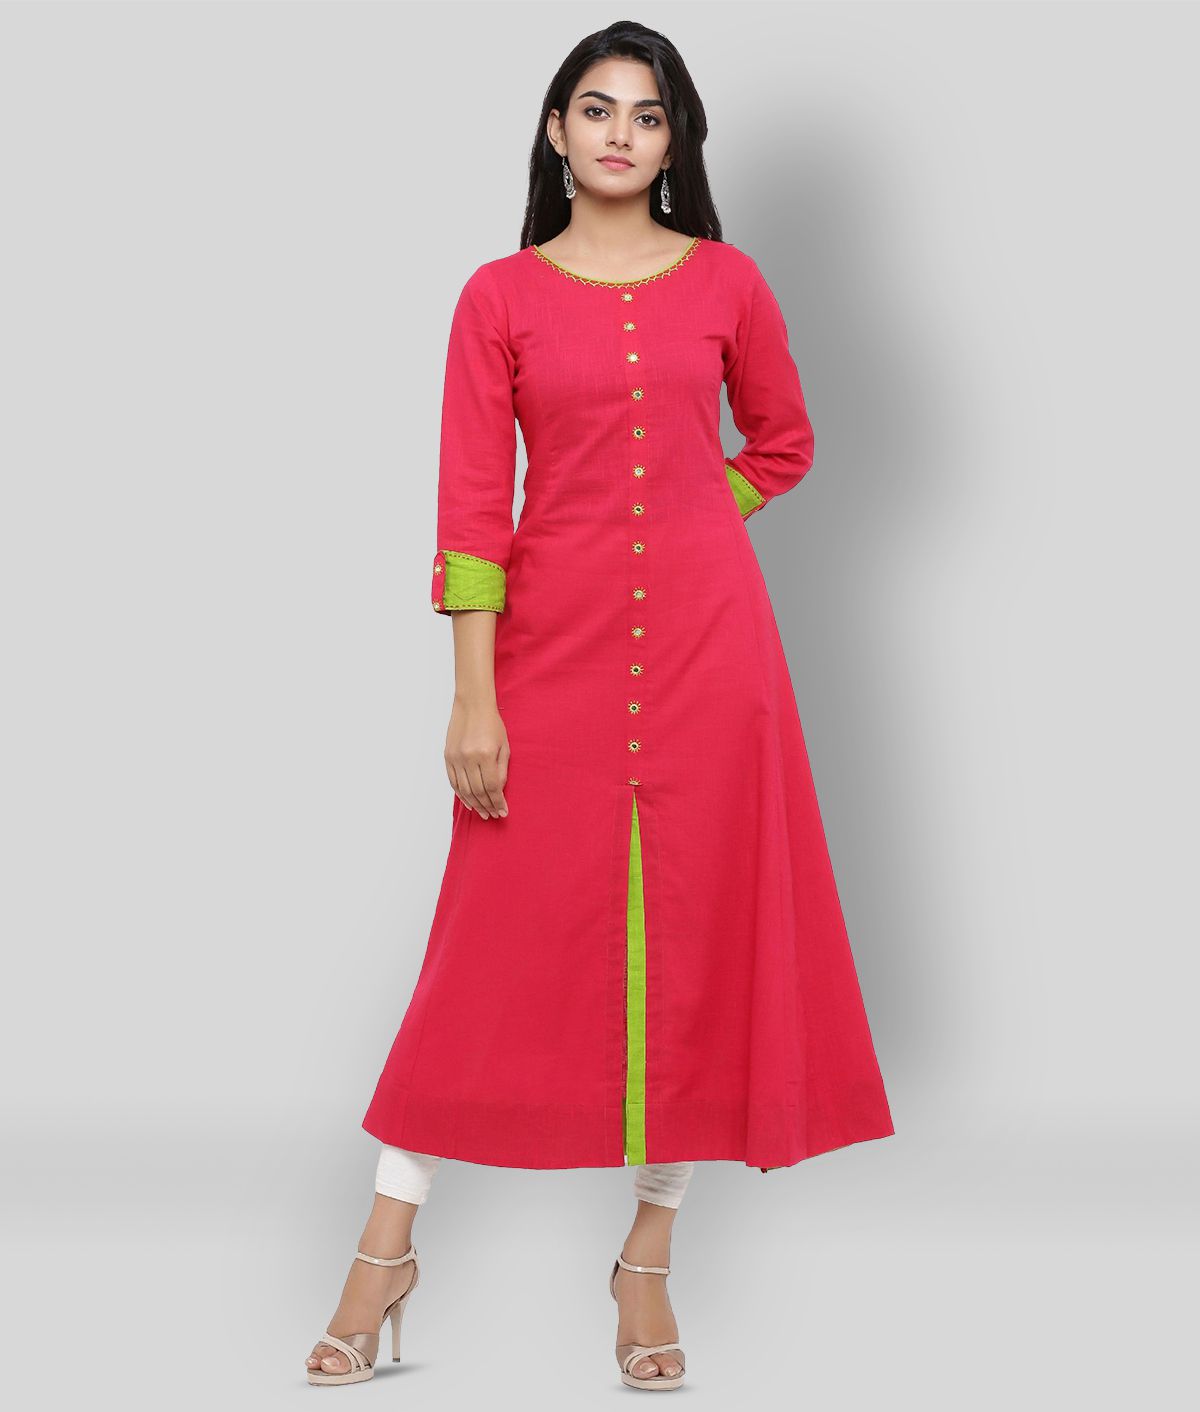     			Yash Gallery - Pink Cotton Blend Women's Flared Kurti ( Pack of 1 )